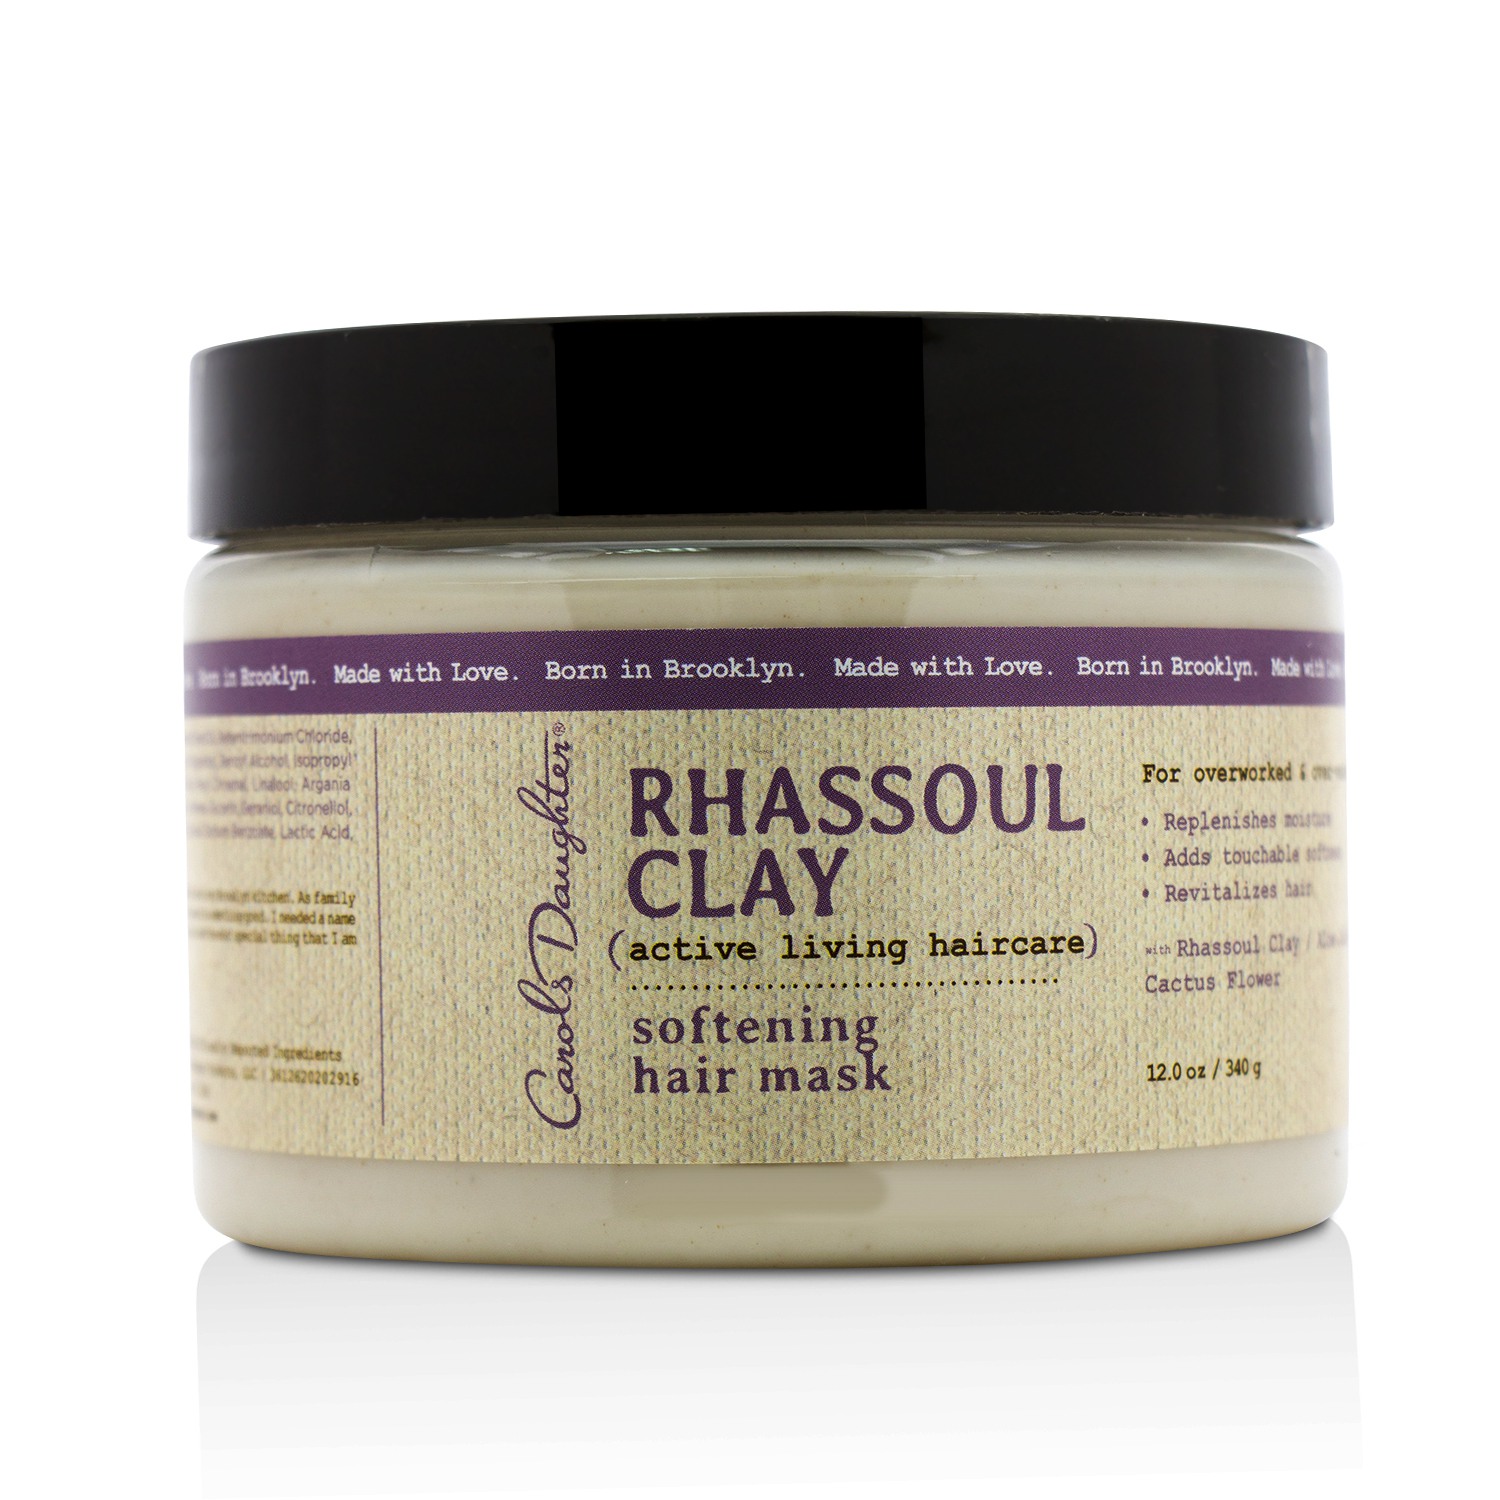 Rhassoul Clay Active Living Haircare Softening Hair Mask (For Overworked & Over-washed Hair) Carols Daughter Image